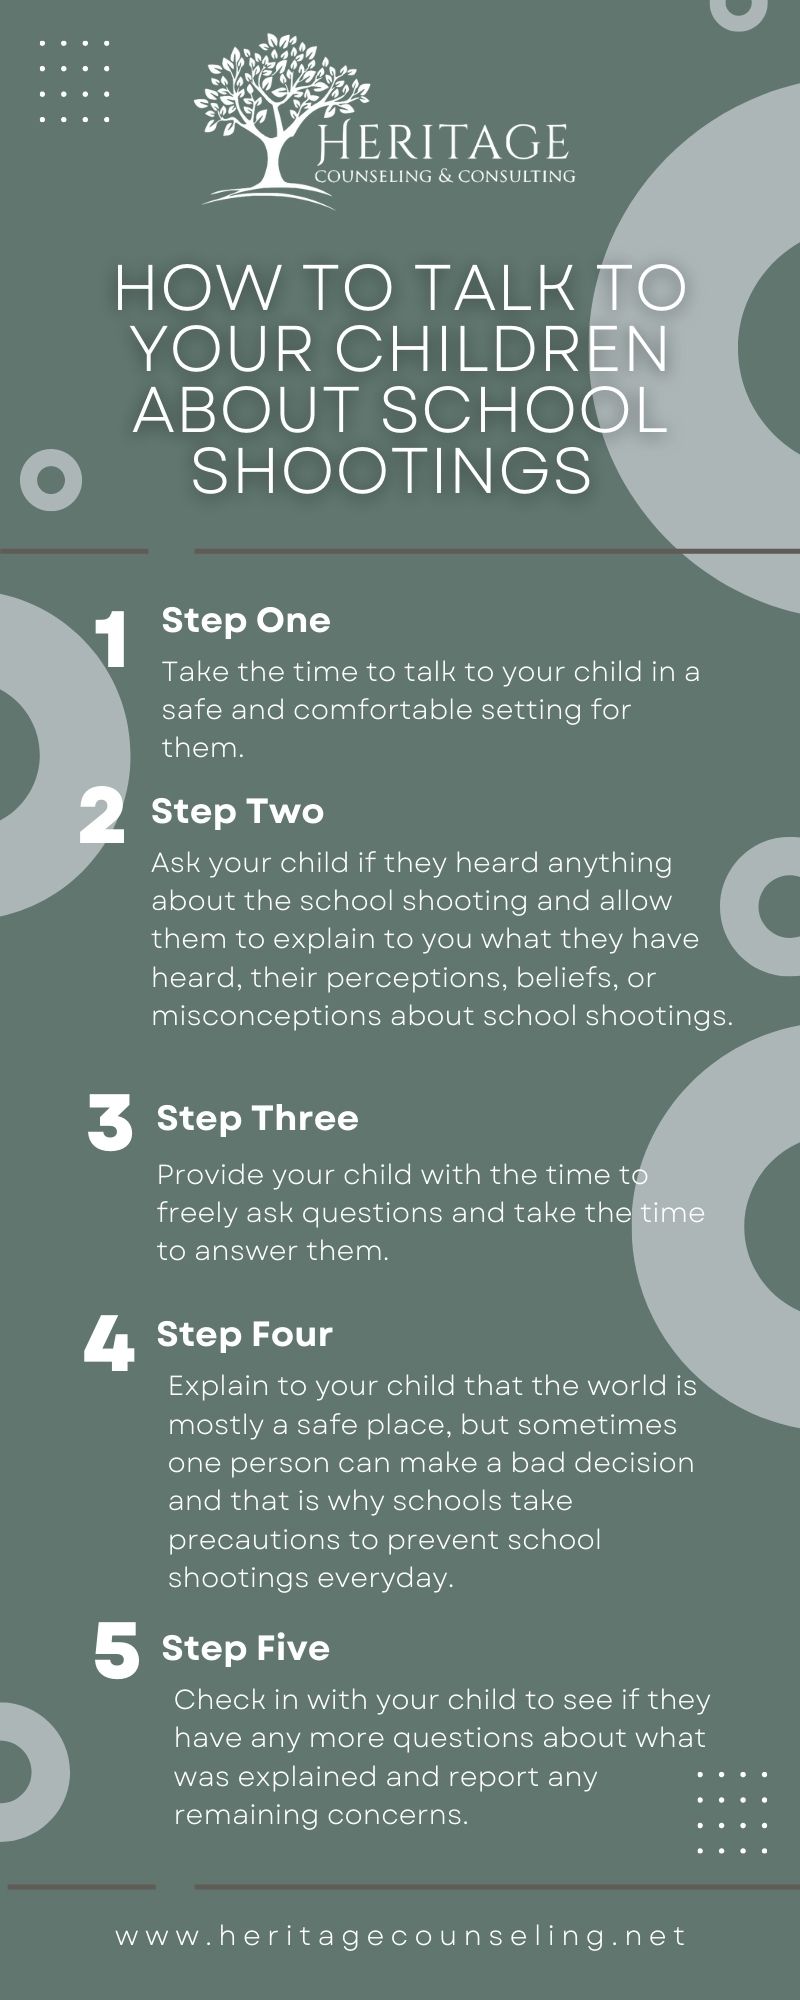 How to talk to your children about school shootings - Infographic (2).jpg